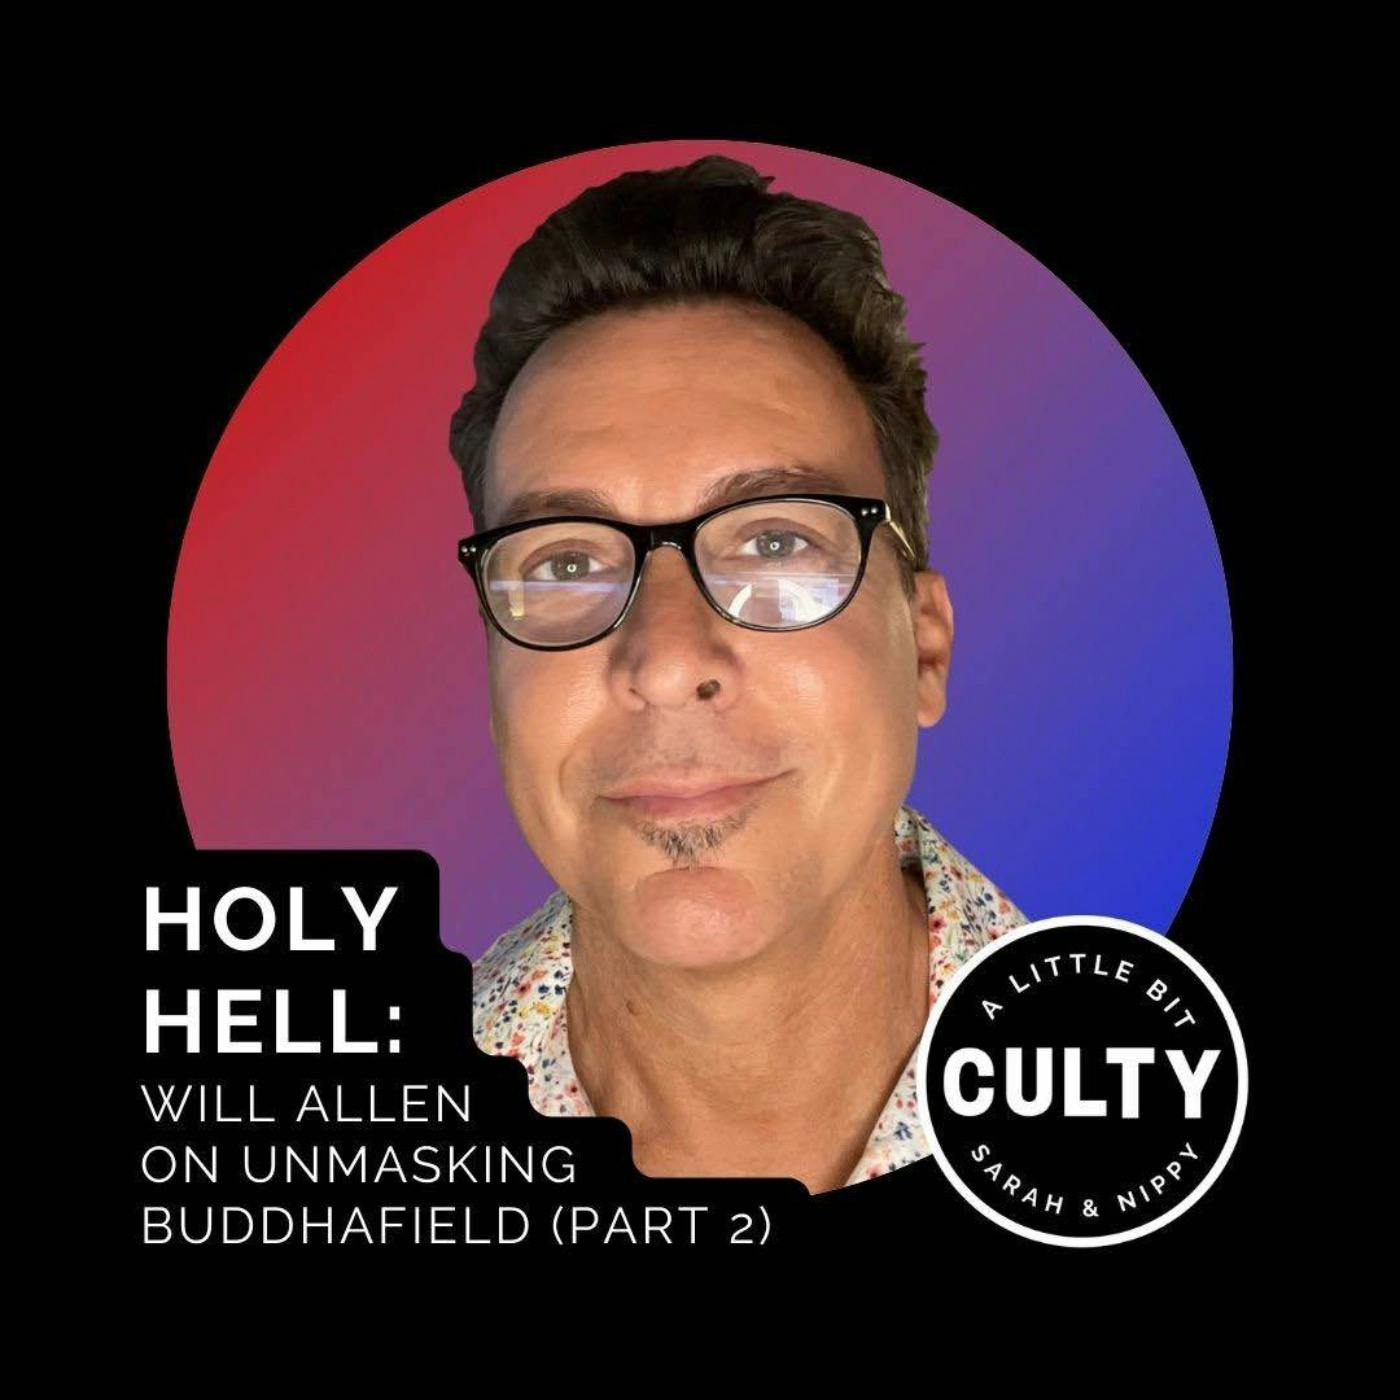 Holy Hell: Will Allen on Unmasking Buddhafield  (Part 2)